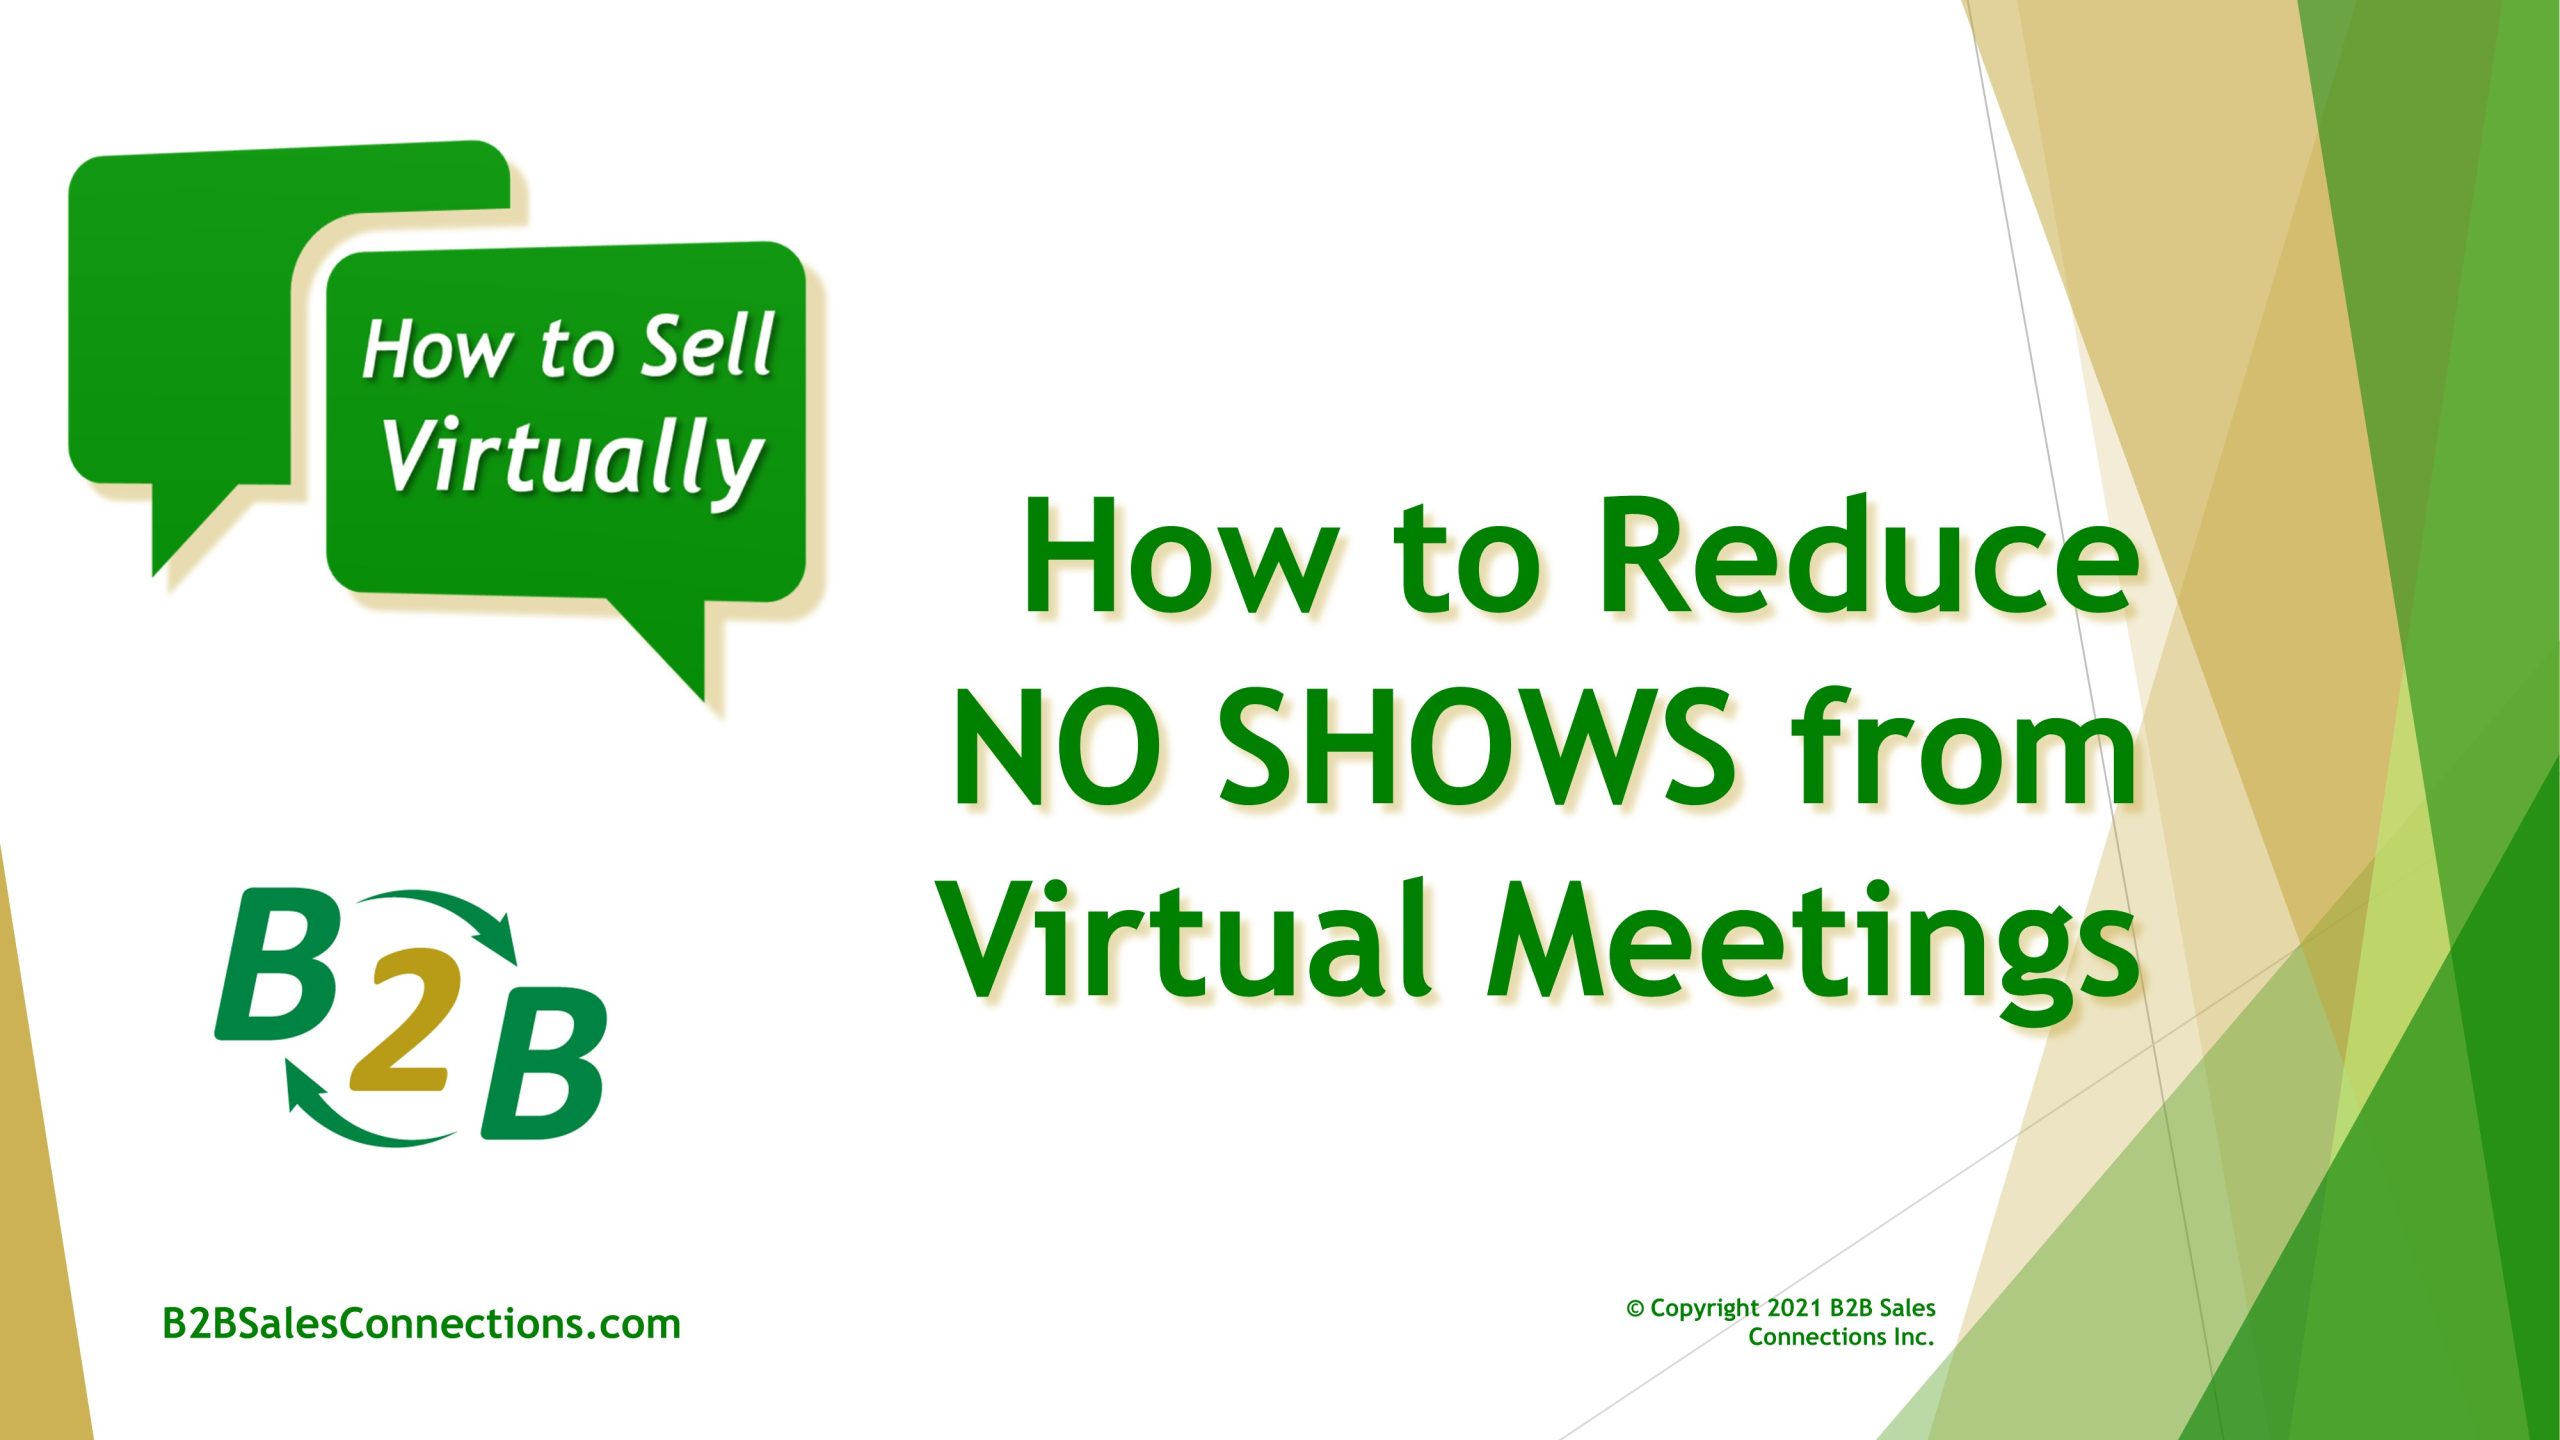 How to Reduce No Shows from Virtual Meetings Sales Training Webinar